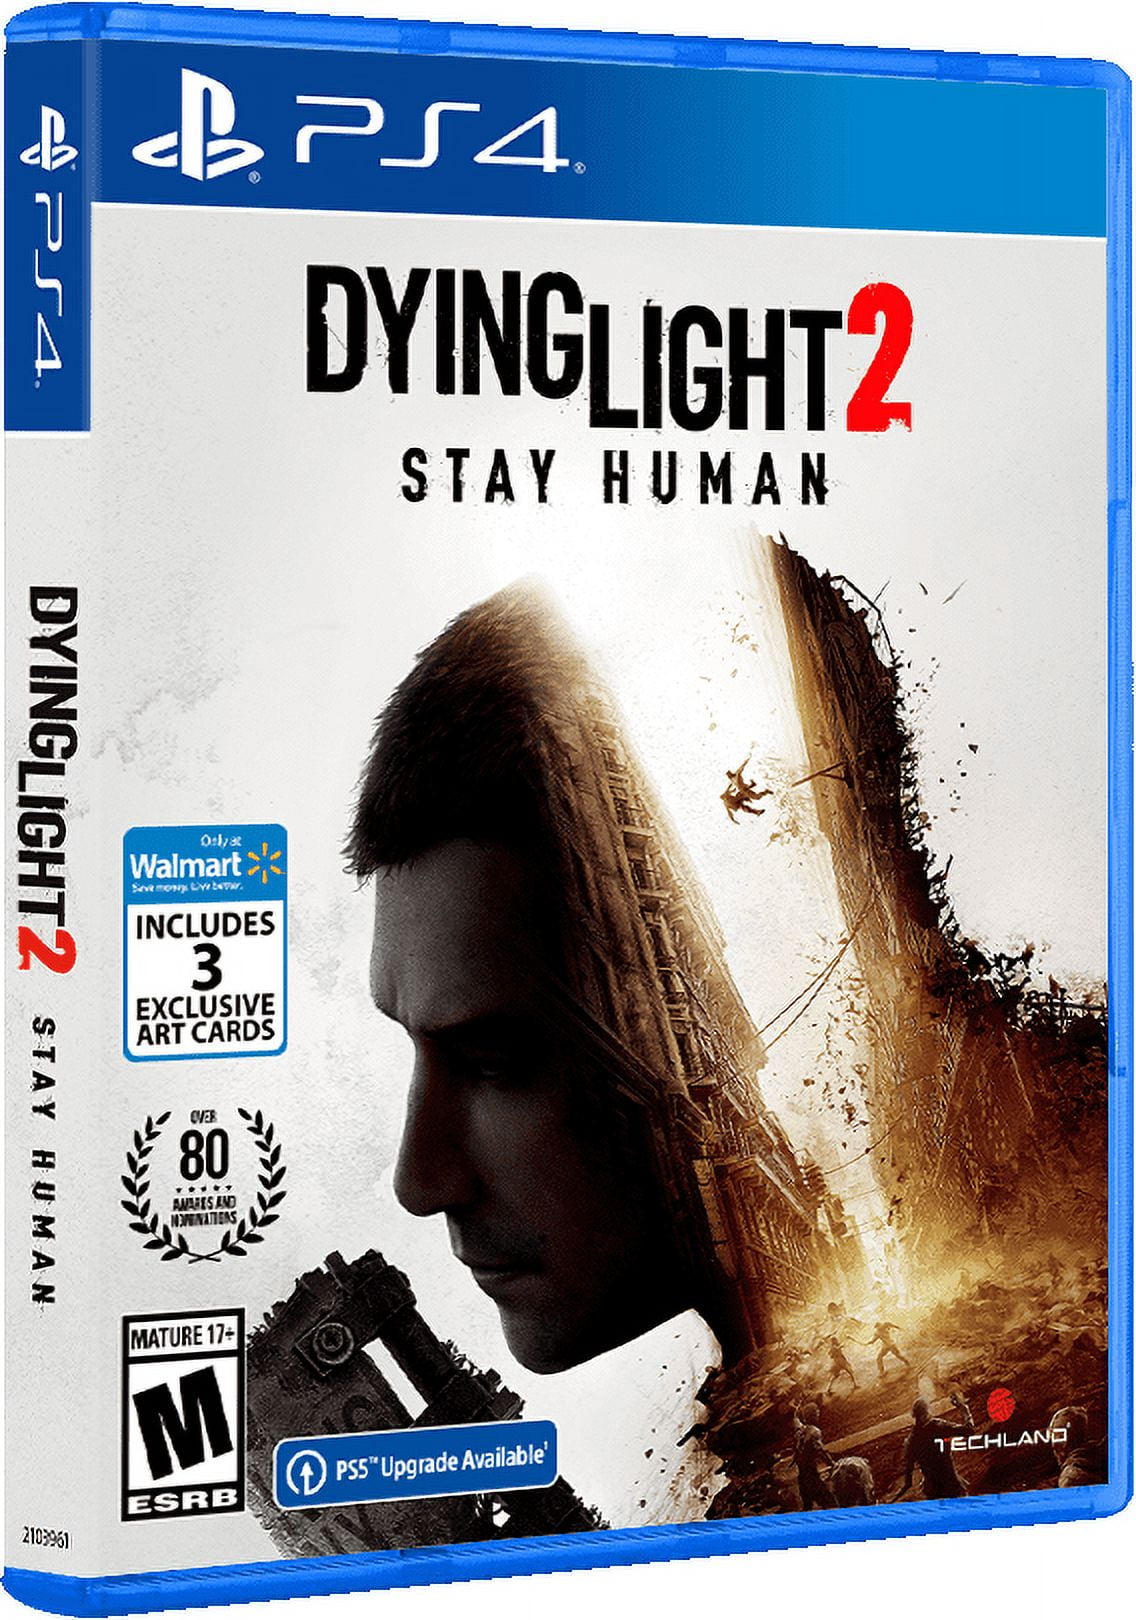 Dying Light 2 Stay Human: Walmart Exclusive - PlayStation 4 